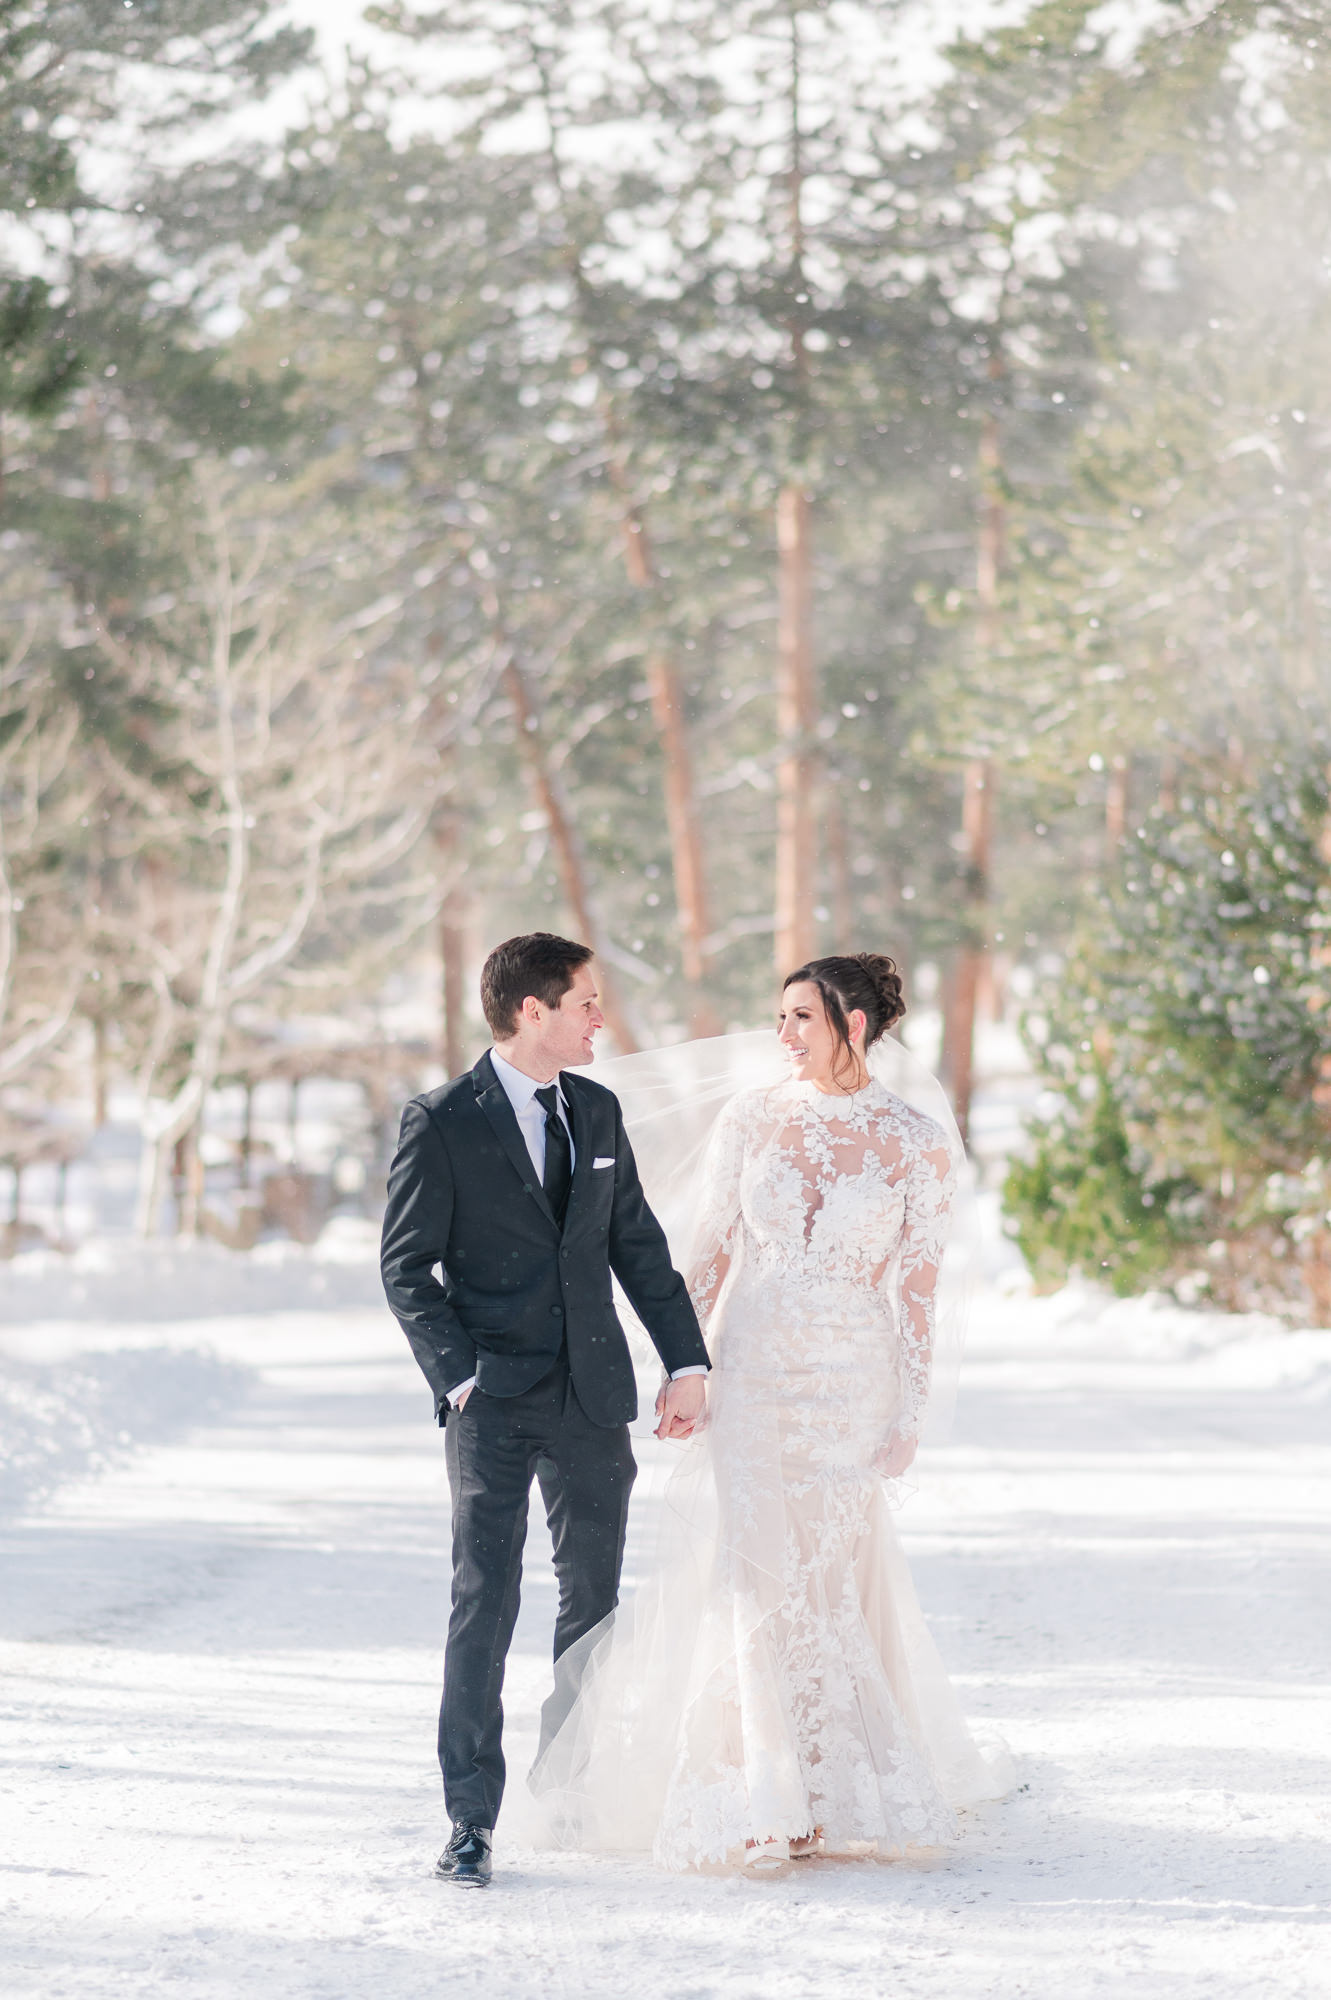 Bride and Groom walk hand in hand down the snowy road on their wedding day at Della Terra Chateau in Estes Park, Colorado.